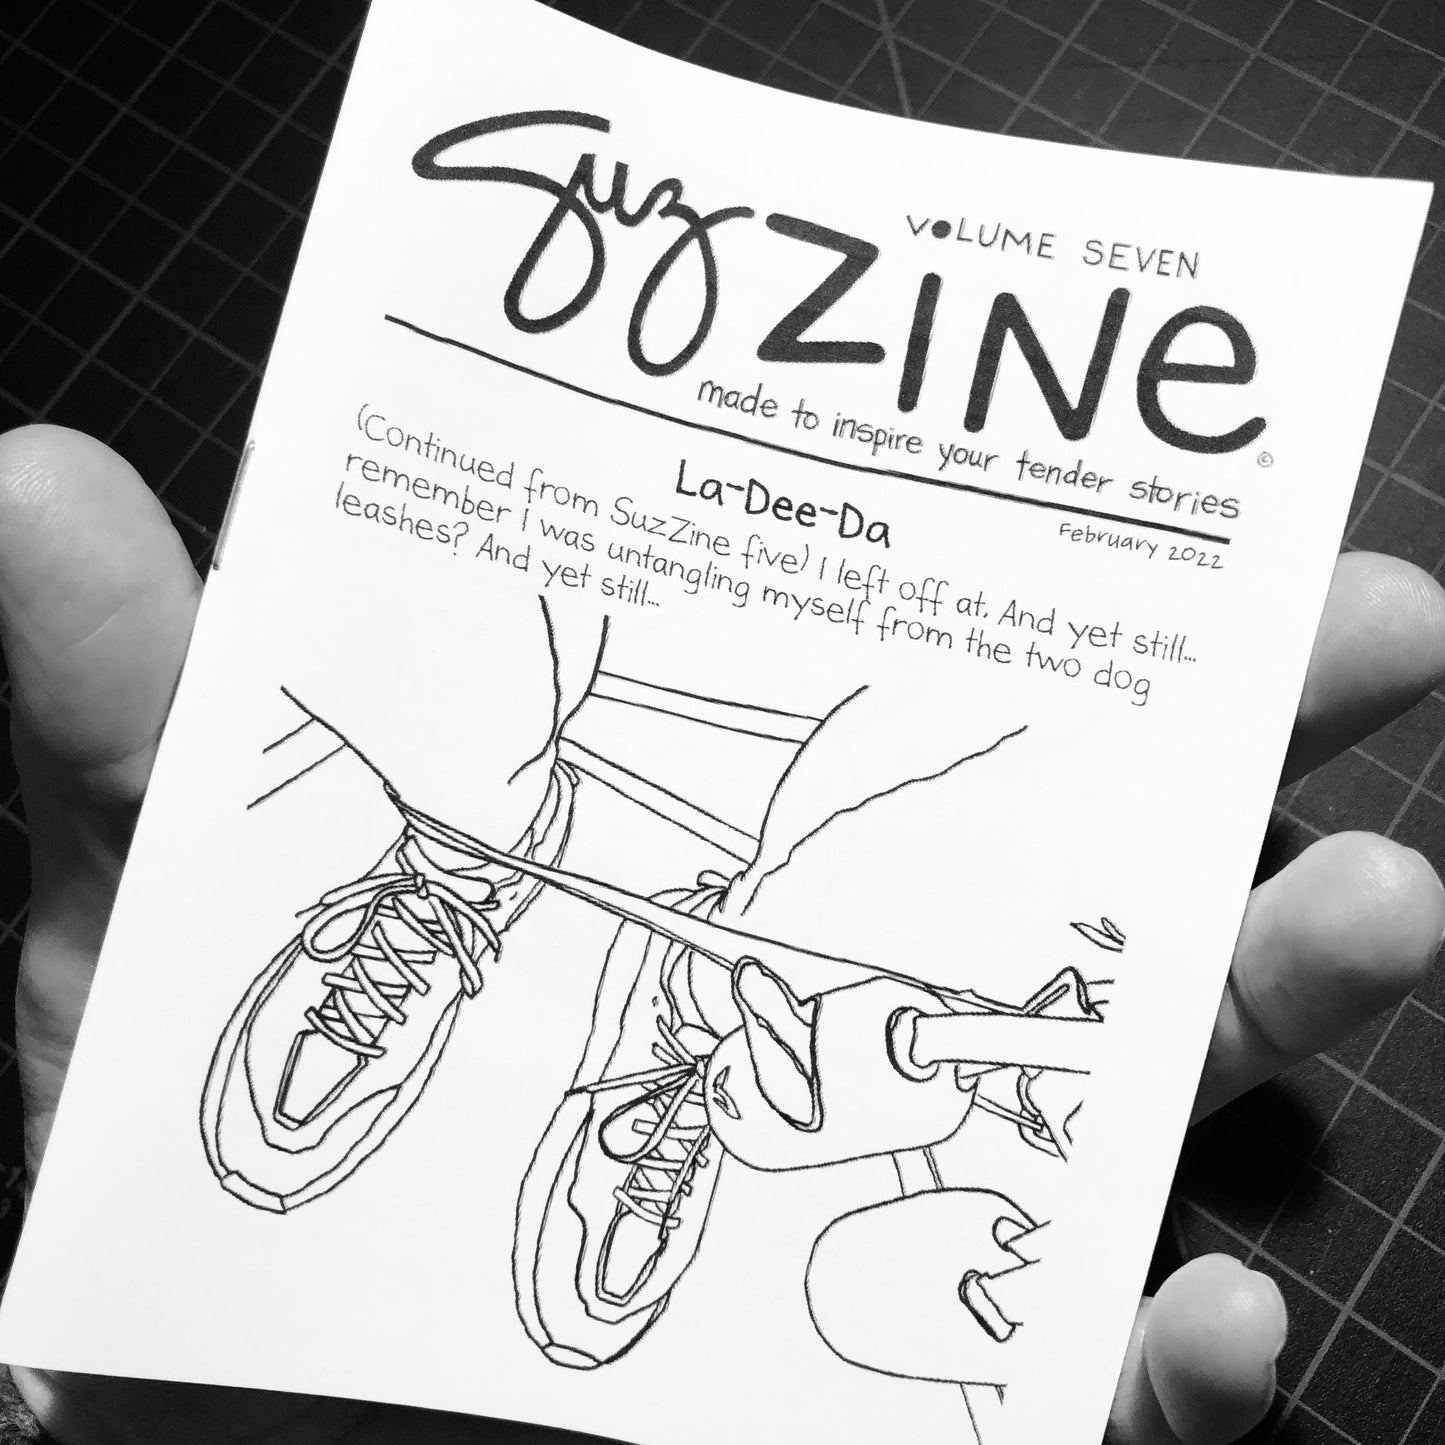 SuzZine—a monthly publication and subscription—made to inspire your tender stories.